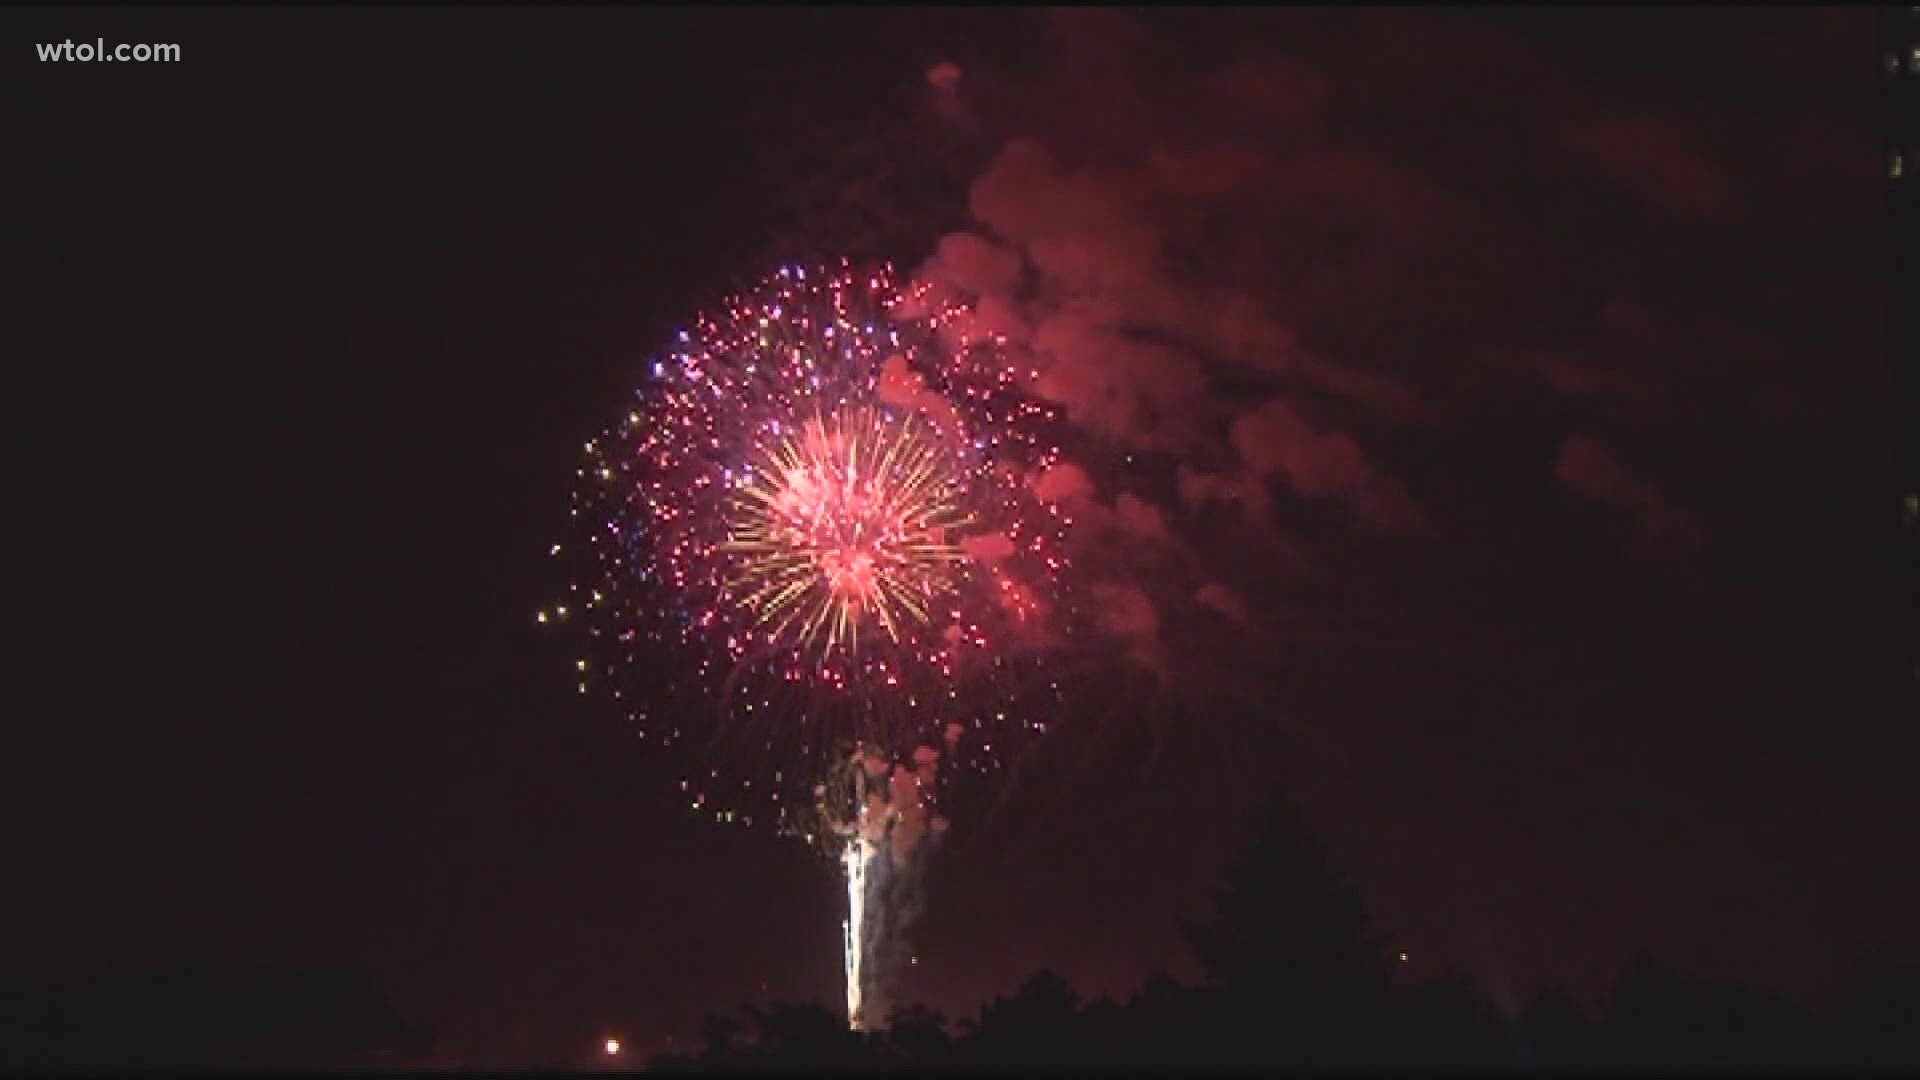 Officials with TFRD say they aren't any more concerned than they would normally be about at-home fireworks displays this year.